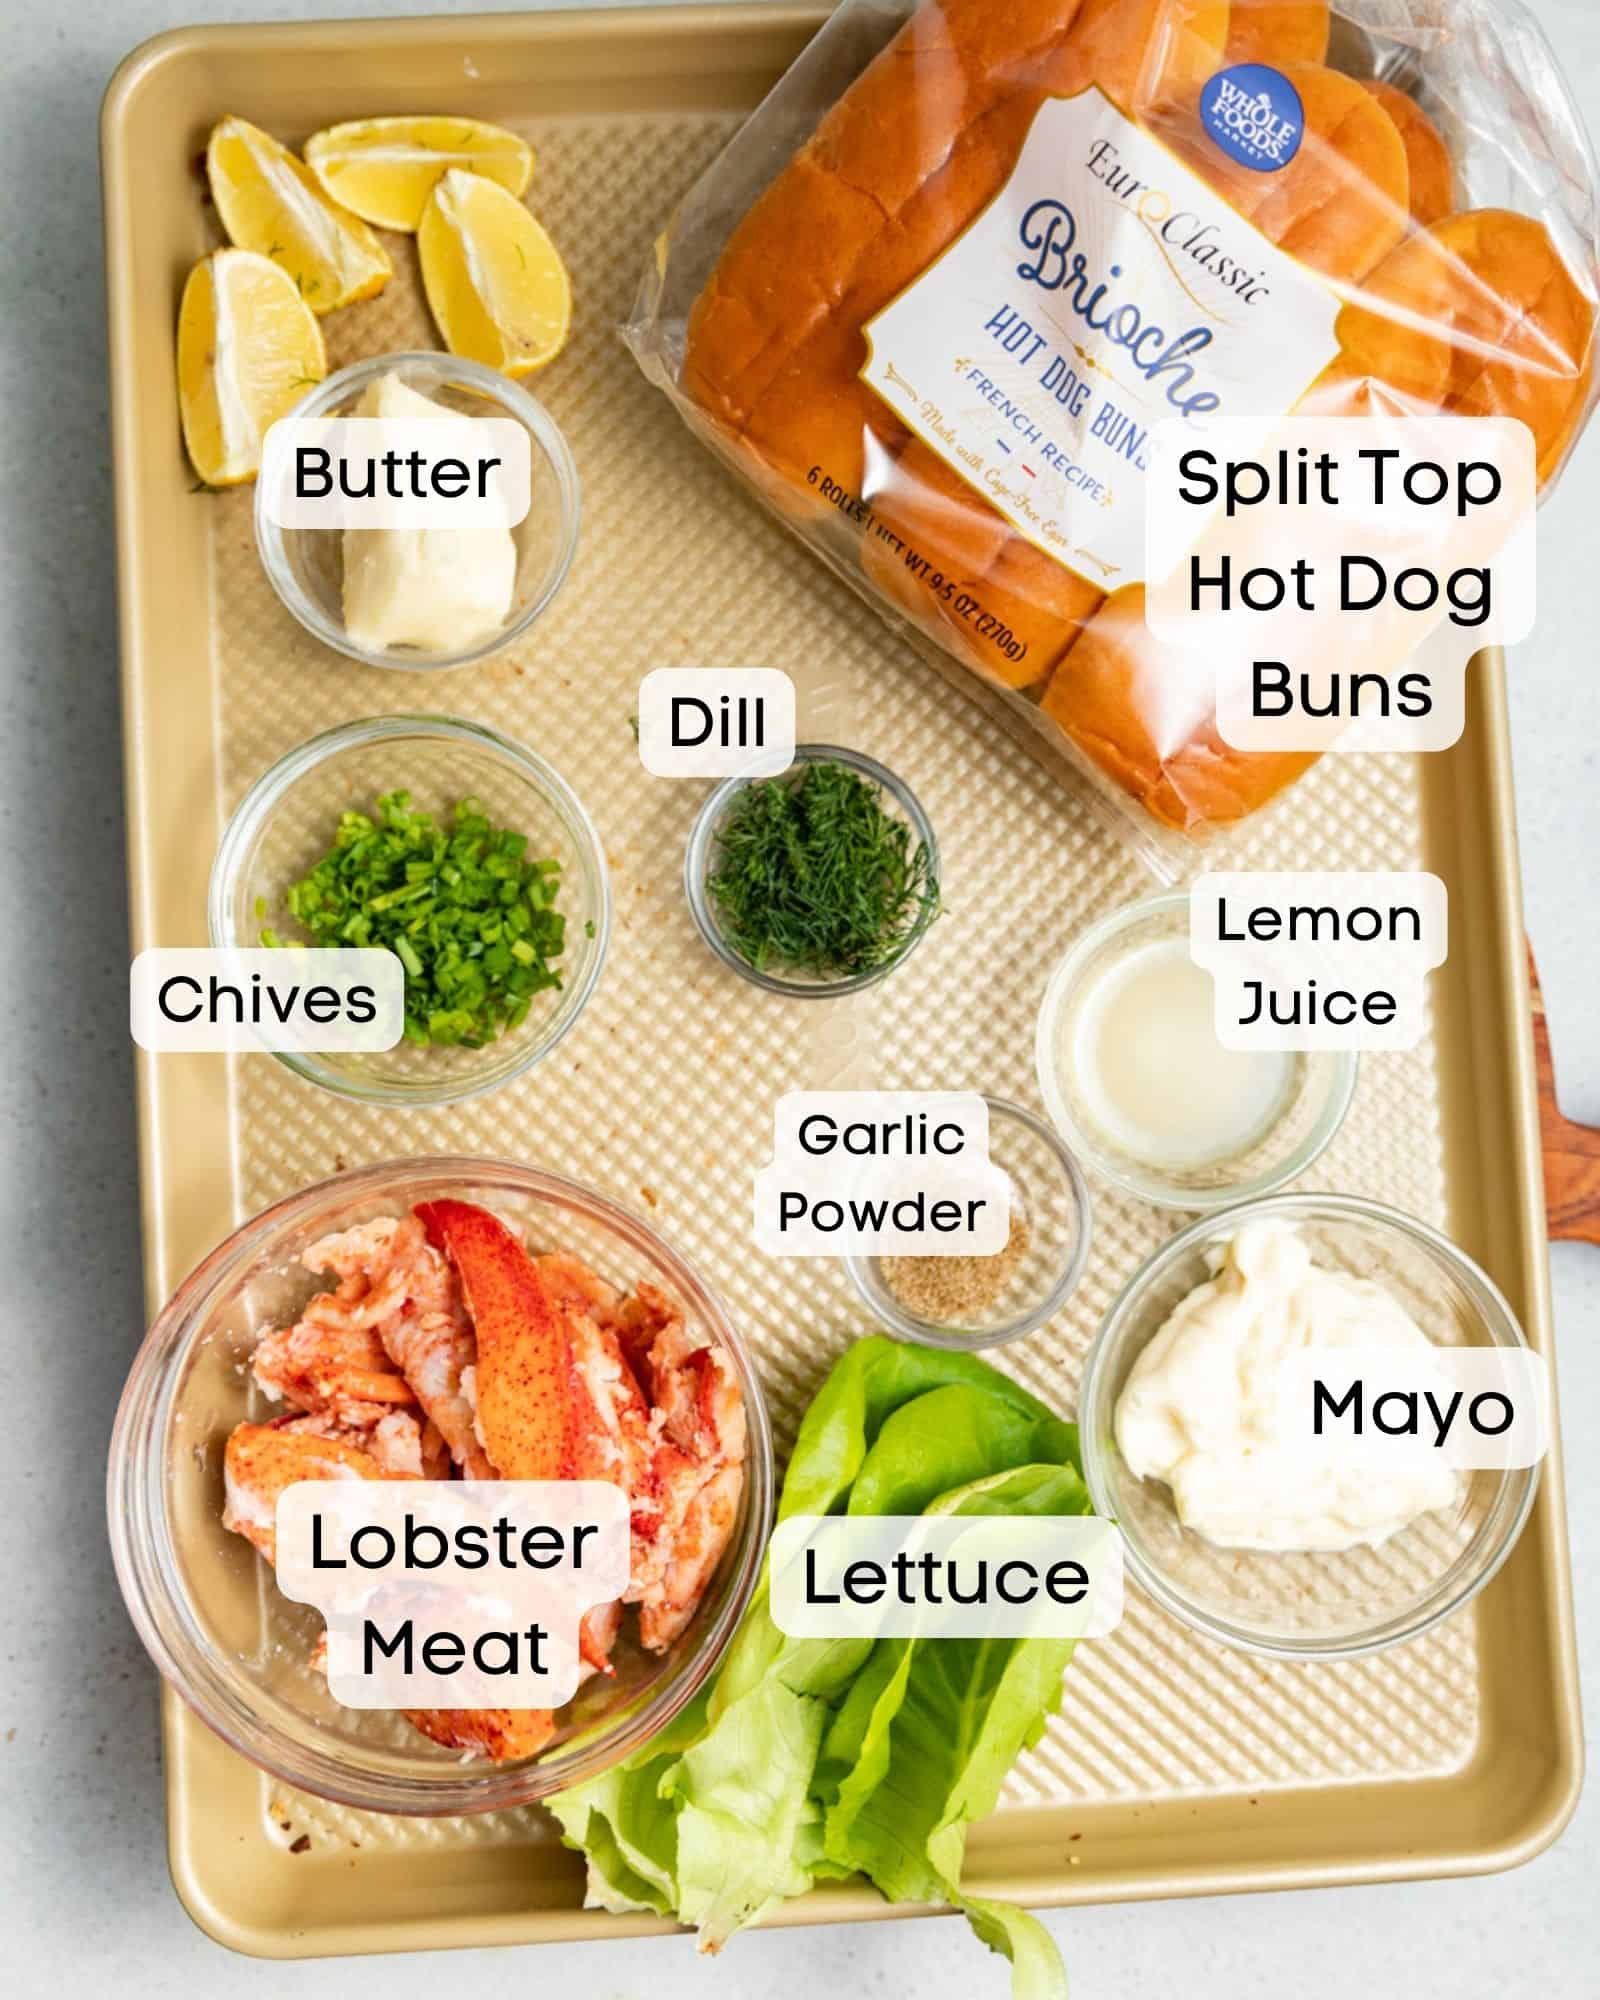 ingredients to make lobster rolls - lobster mat, hot dog buns, lettuce, mayo, lemon juice, seasonings, butter, chives, and dill.